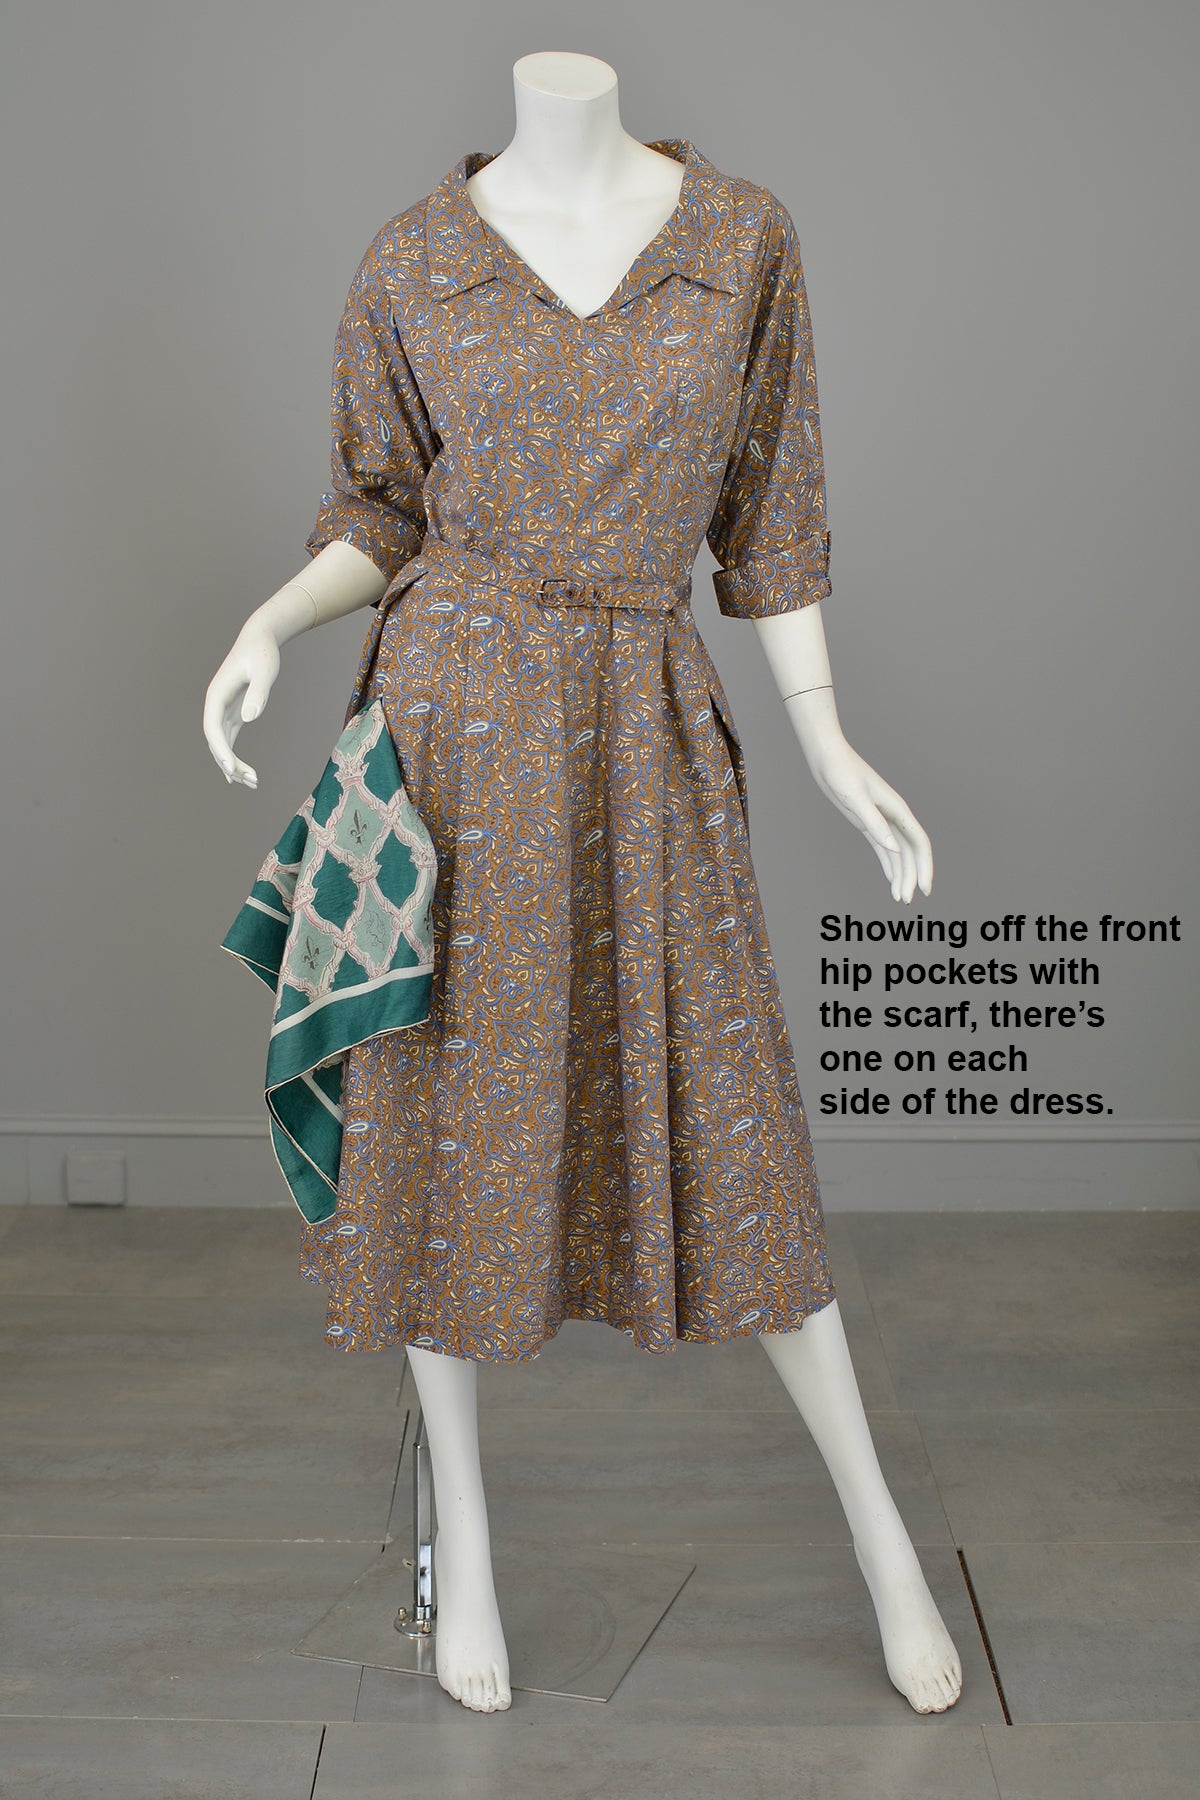 1940s early 50s Floral Paisley Novelty Print Dress | Vintage Working Girl Office Dress